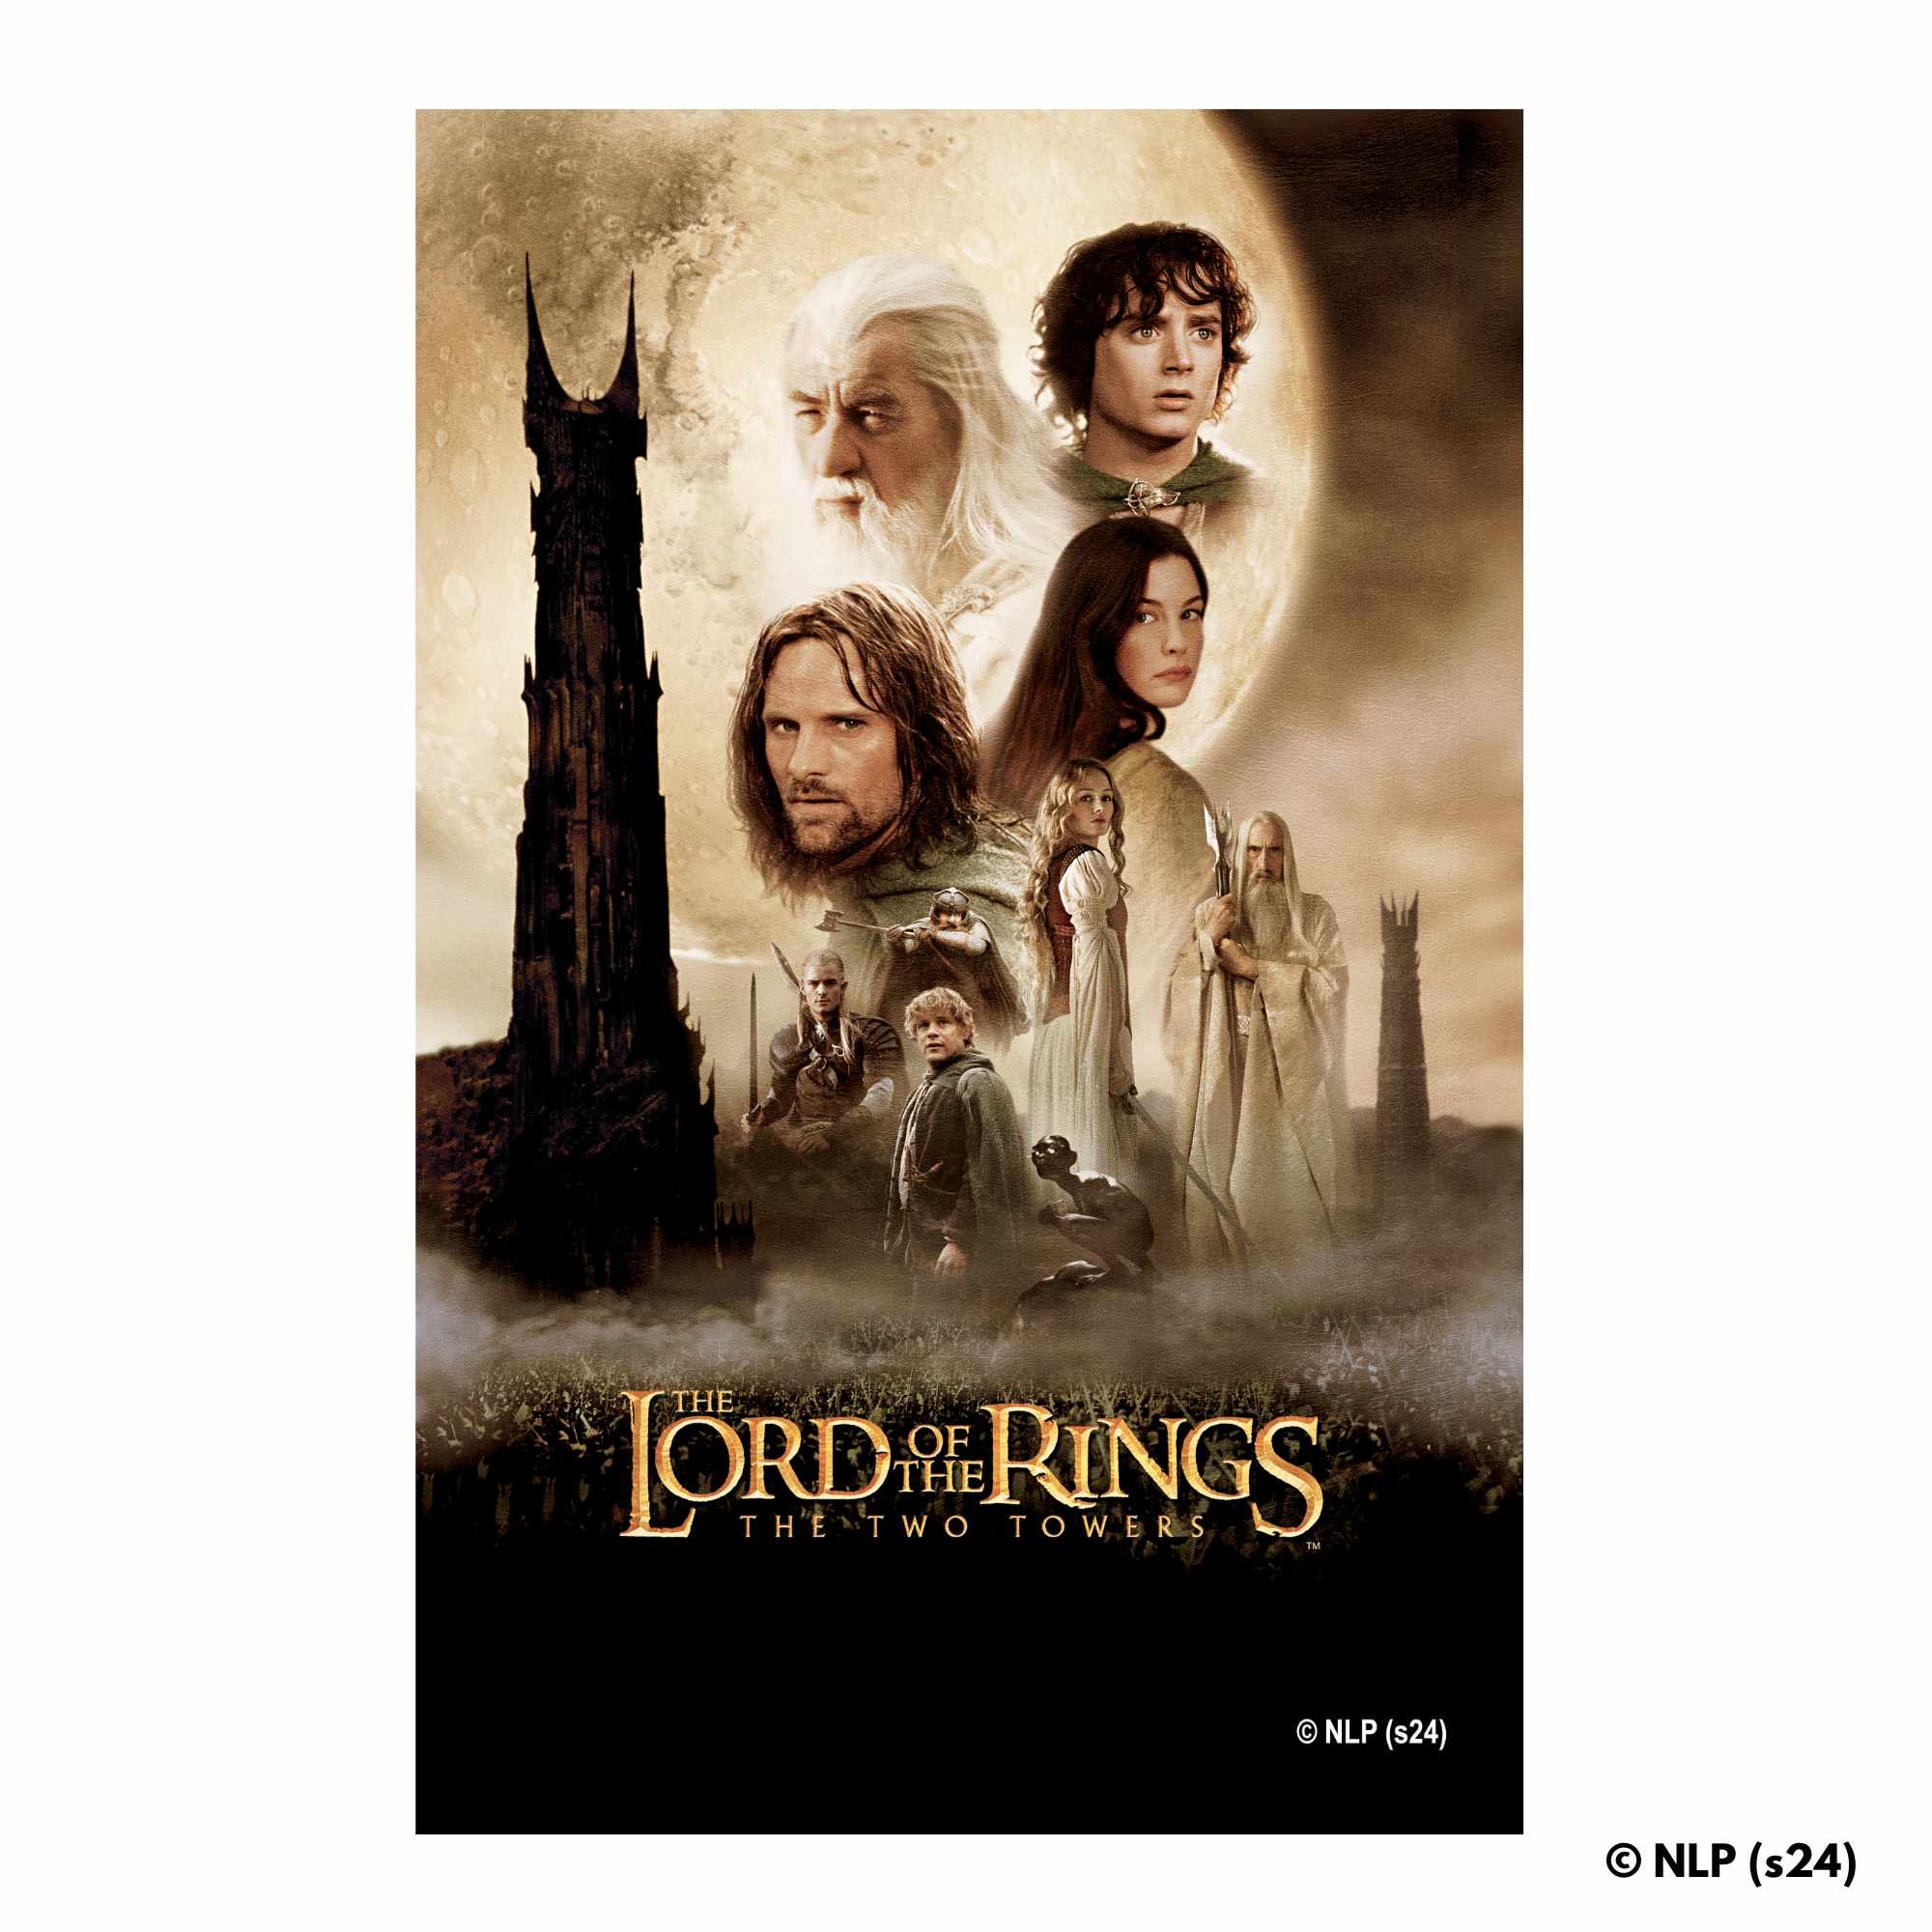 Animal Jigsaw Puzzle > Wooden Jigsaw Puzzle > Jigsaw Puzzle The Fellowship of the Two Towers - Wooden Jigsaw Puzzle